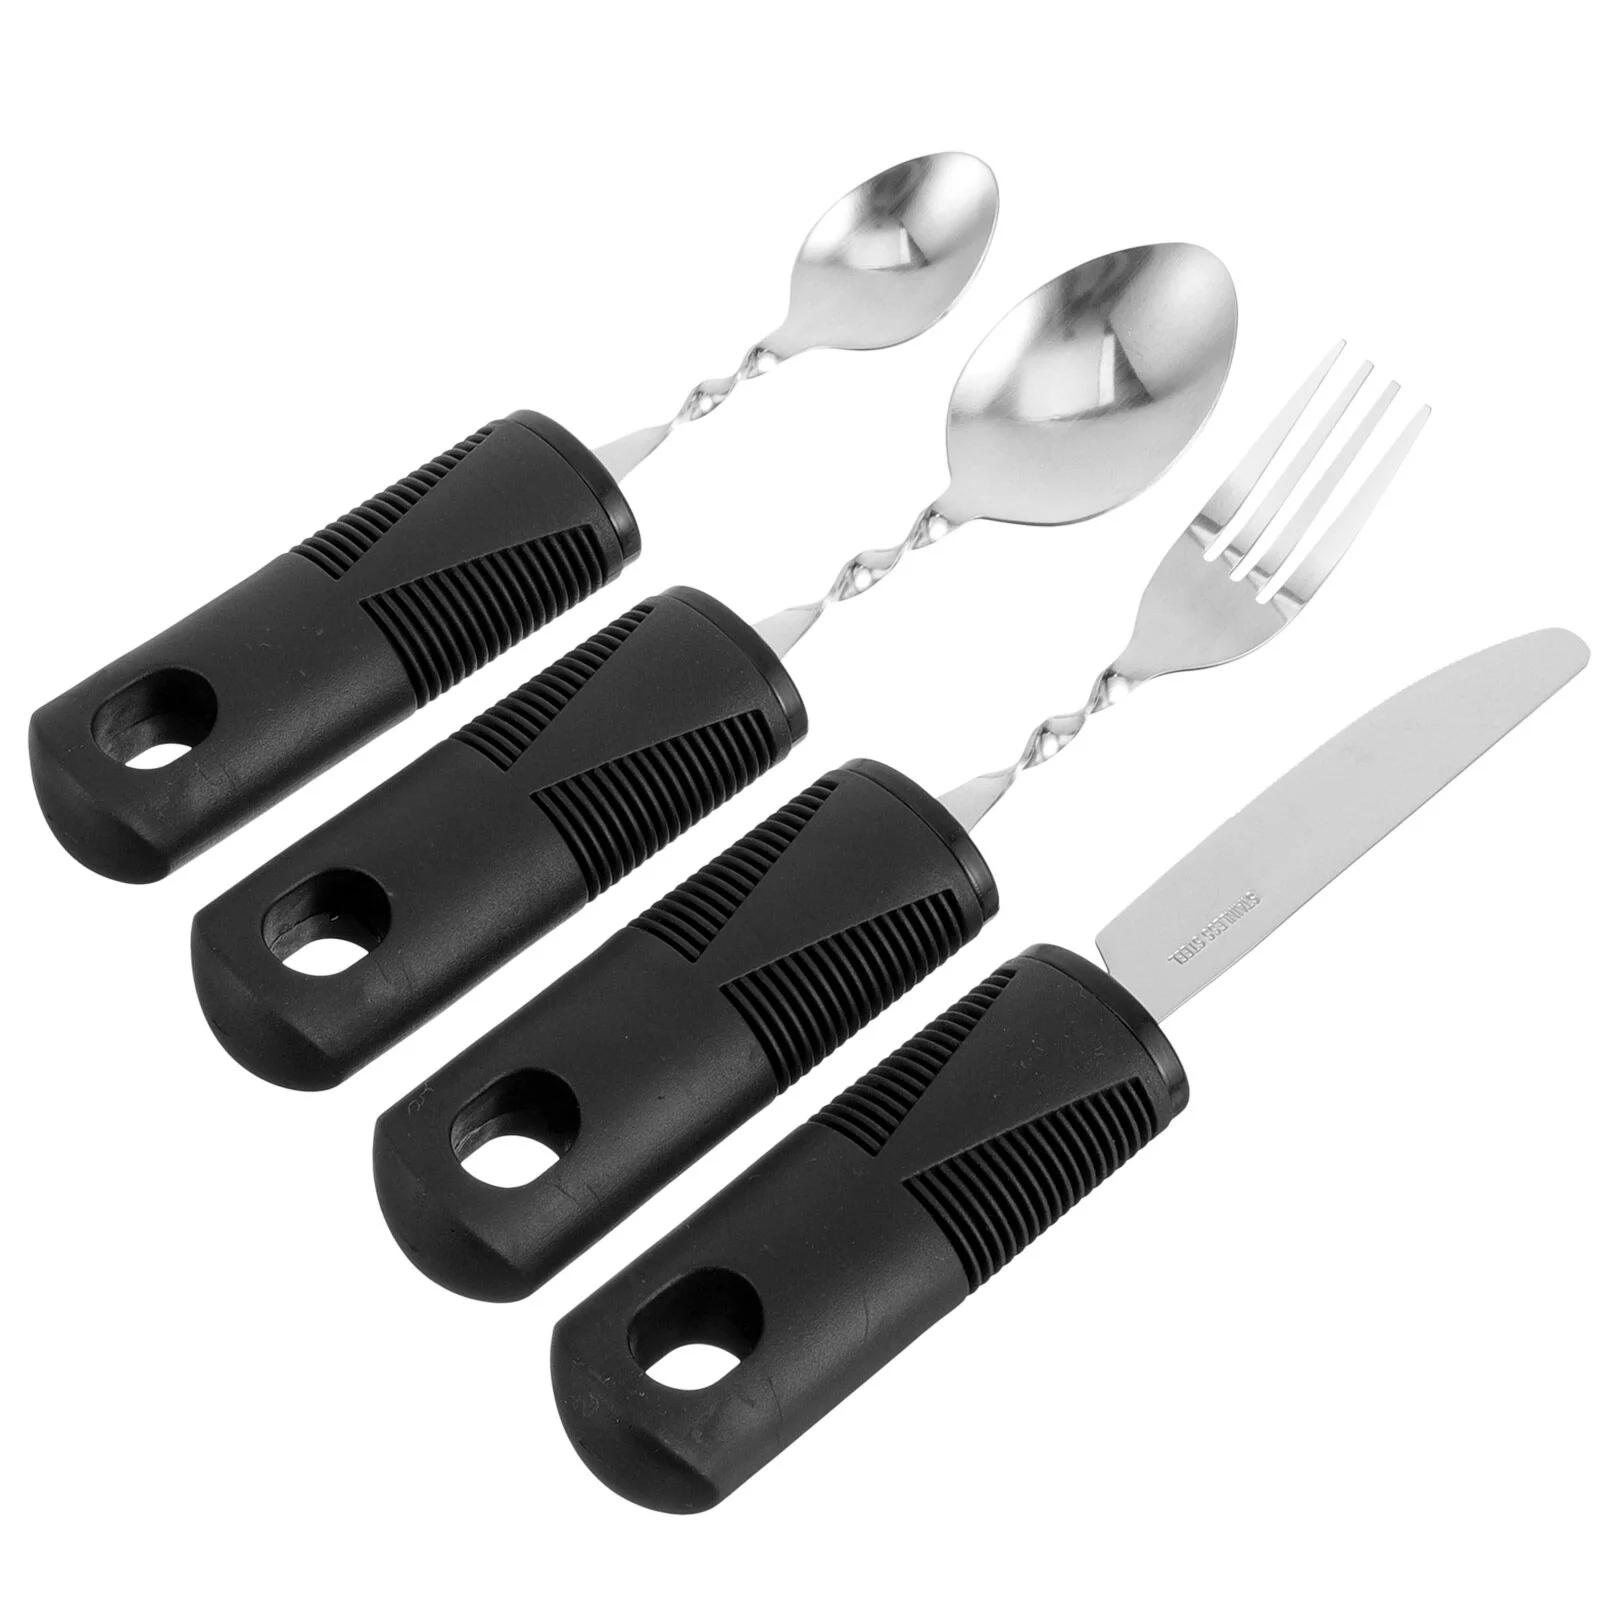 

4 Pcs Bendable Cutlery Adult Utensil Stainless Flatware Aldult Disabled Elderly Tableware The Steel Weighted Utensils Dishes